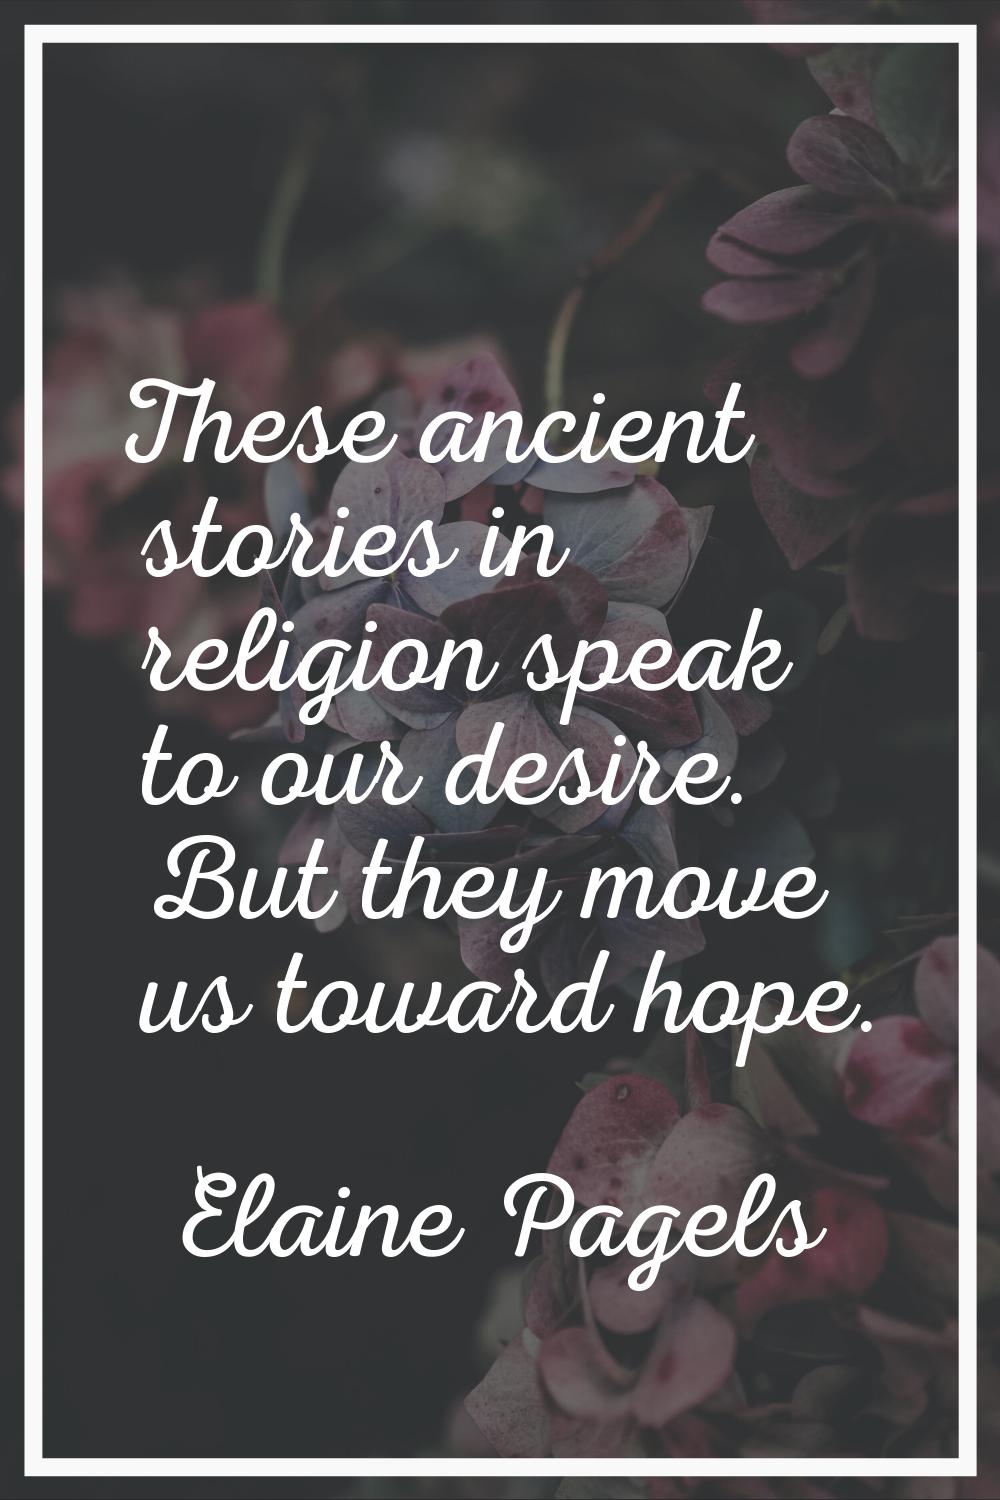 These ancient stories in religion speak to our desire. But they move us toward hope.